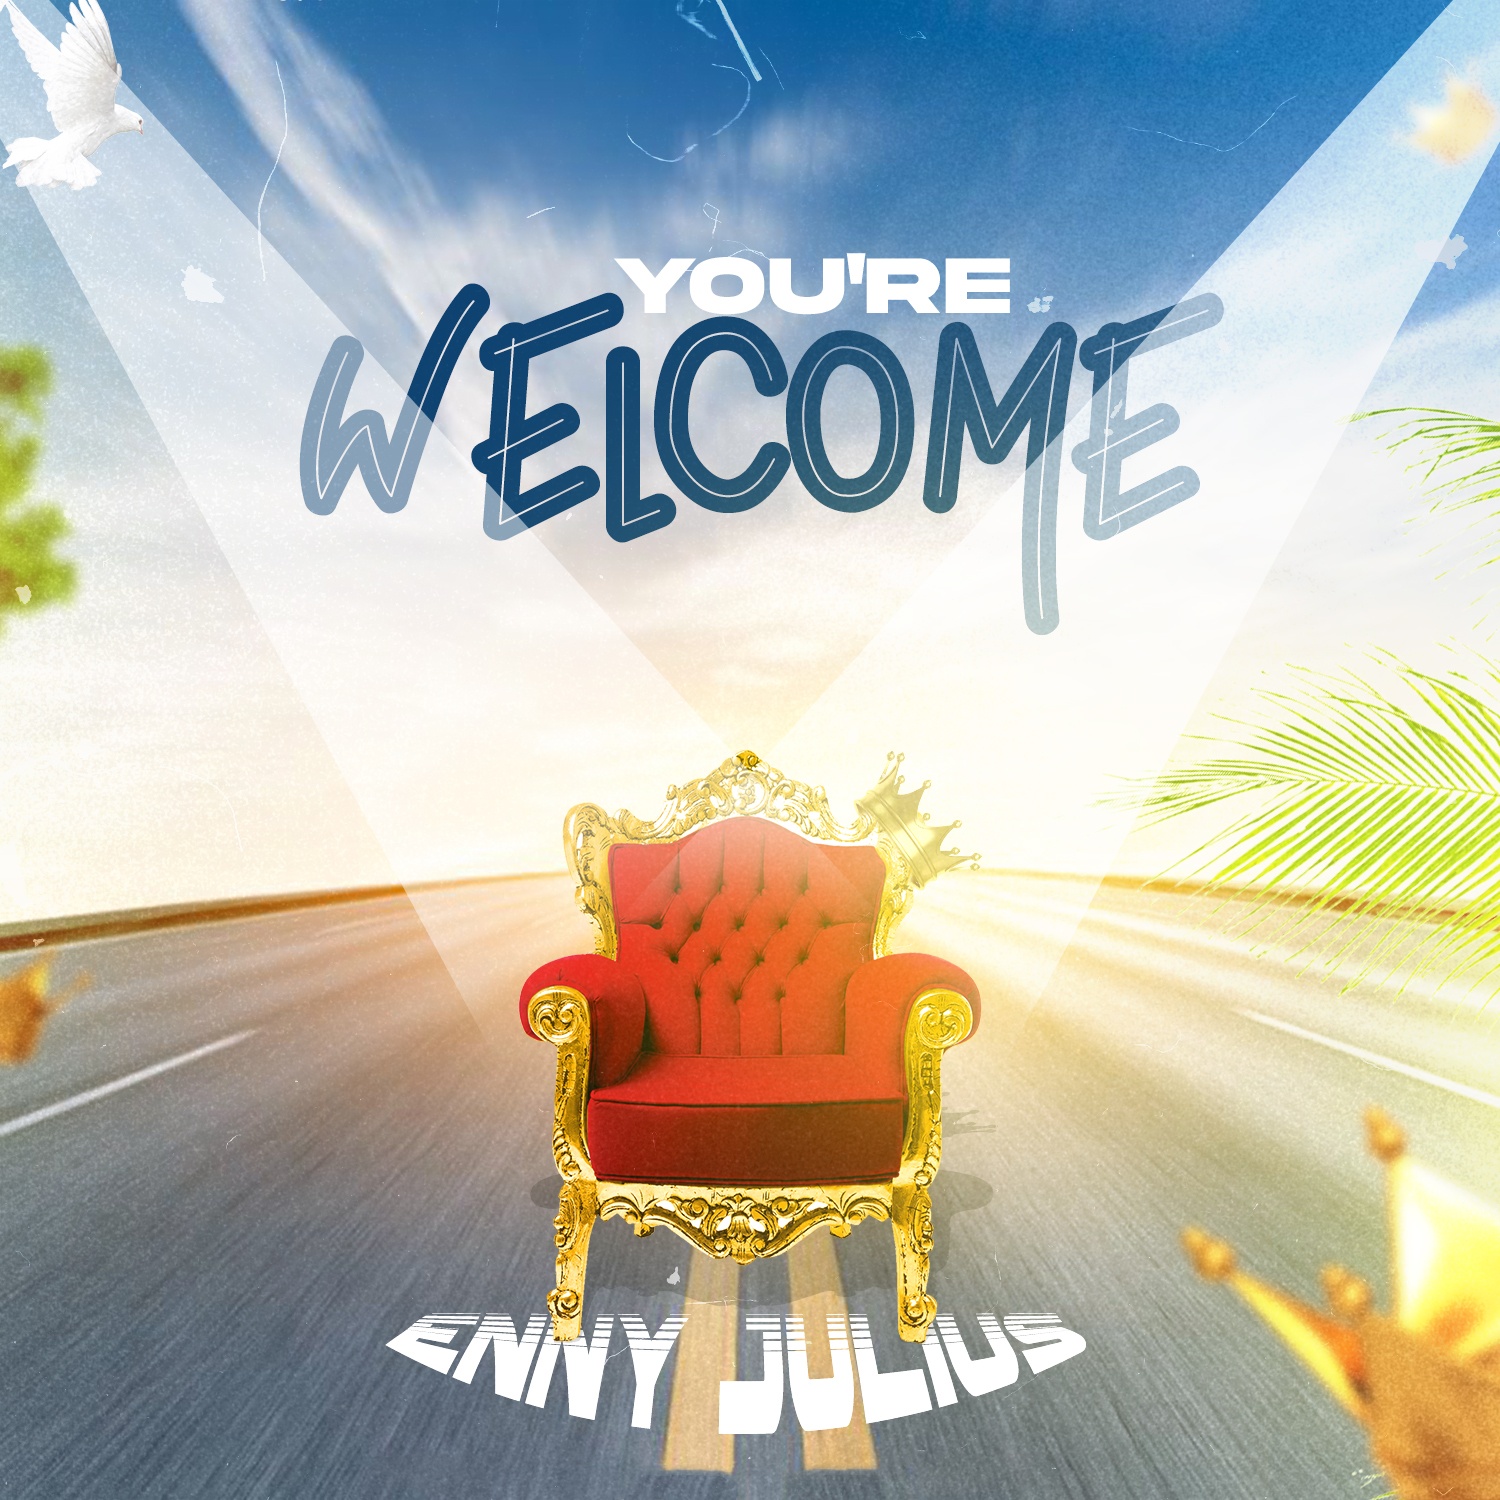 enny julius- you are welcome